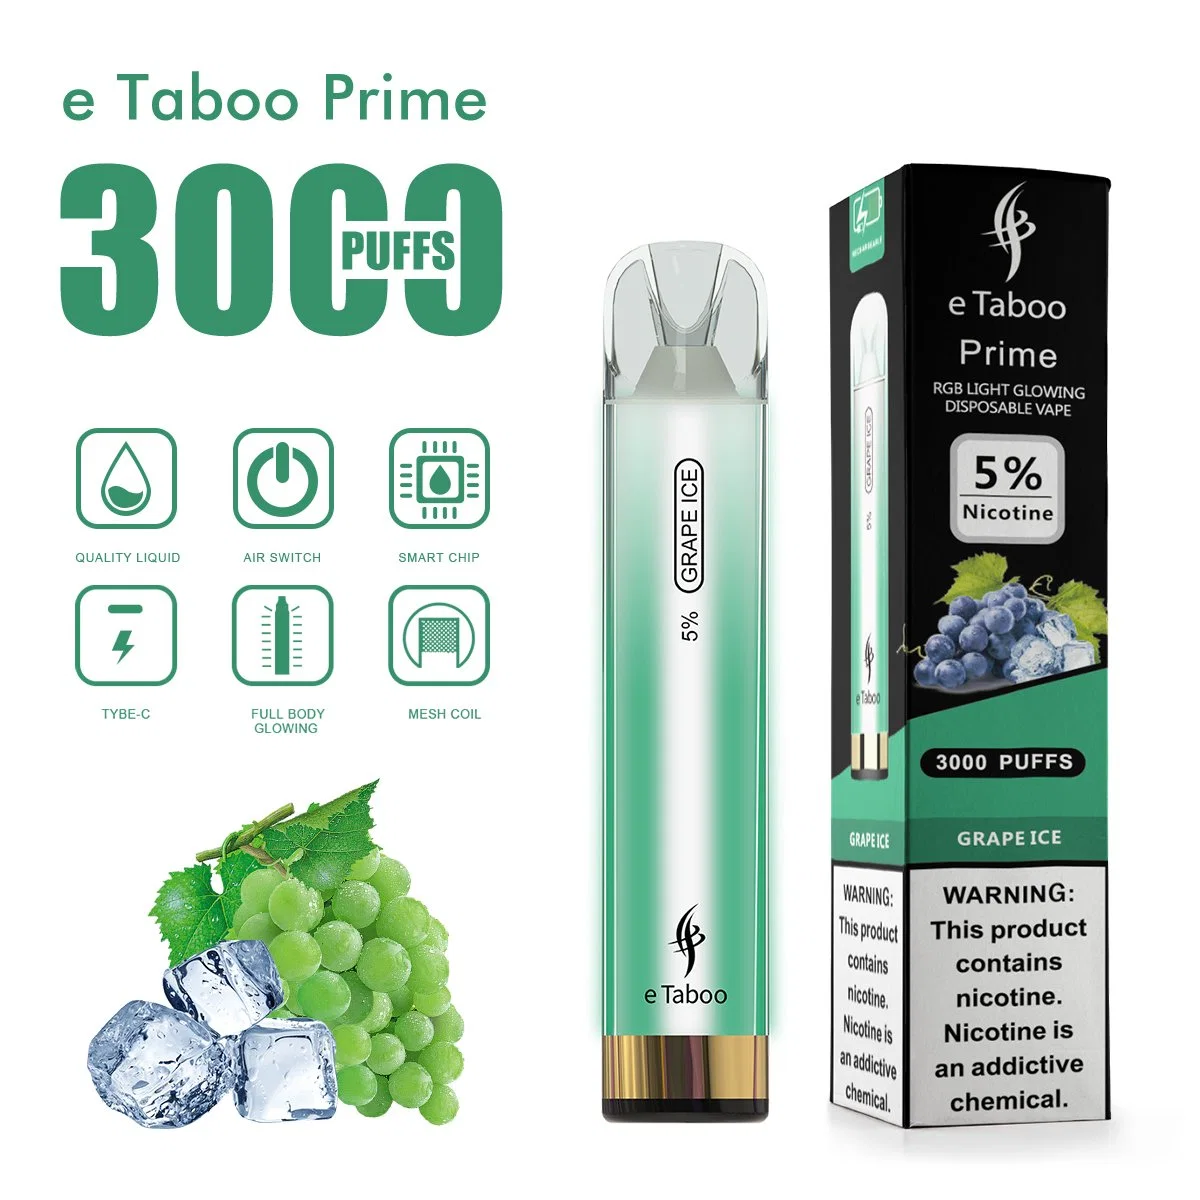 E Taboo Prime 3000 Puffs Mesh Coil Electronic Cigarette Disposable Glow Vape Rechargeable